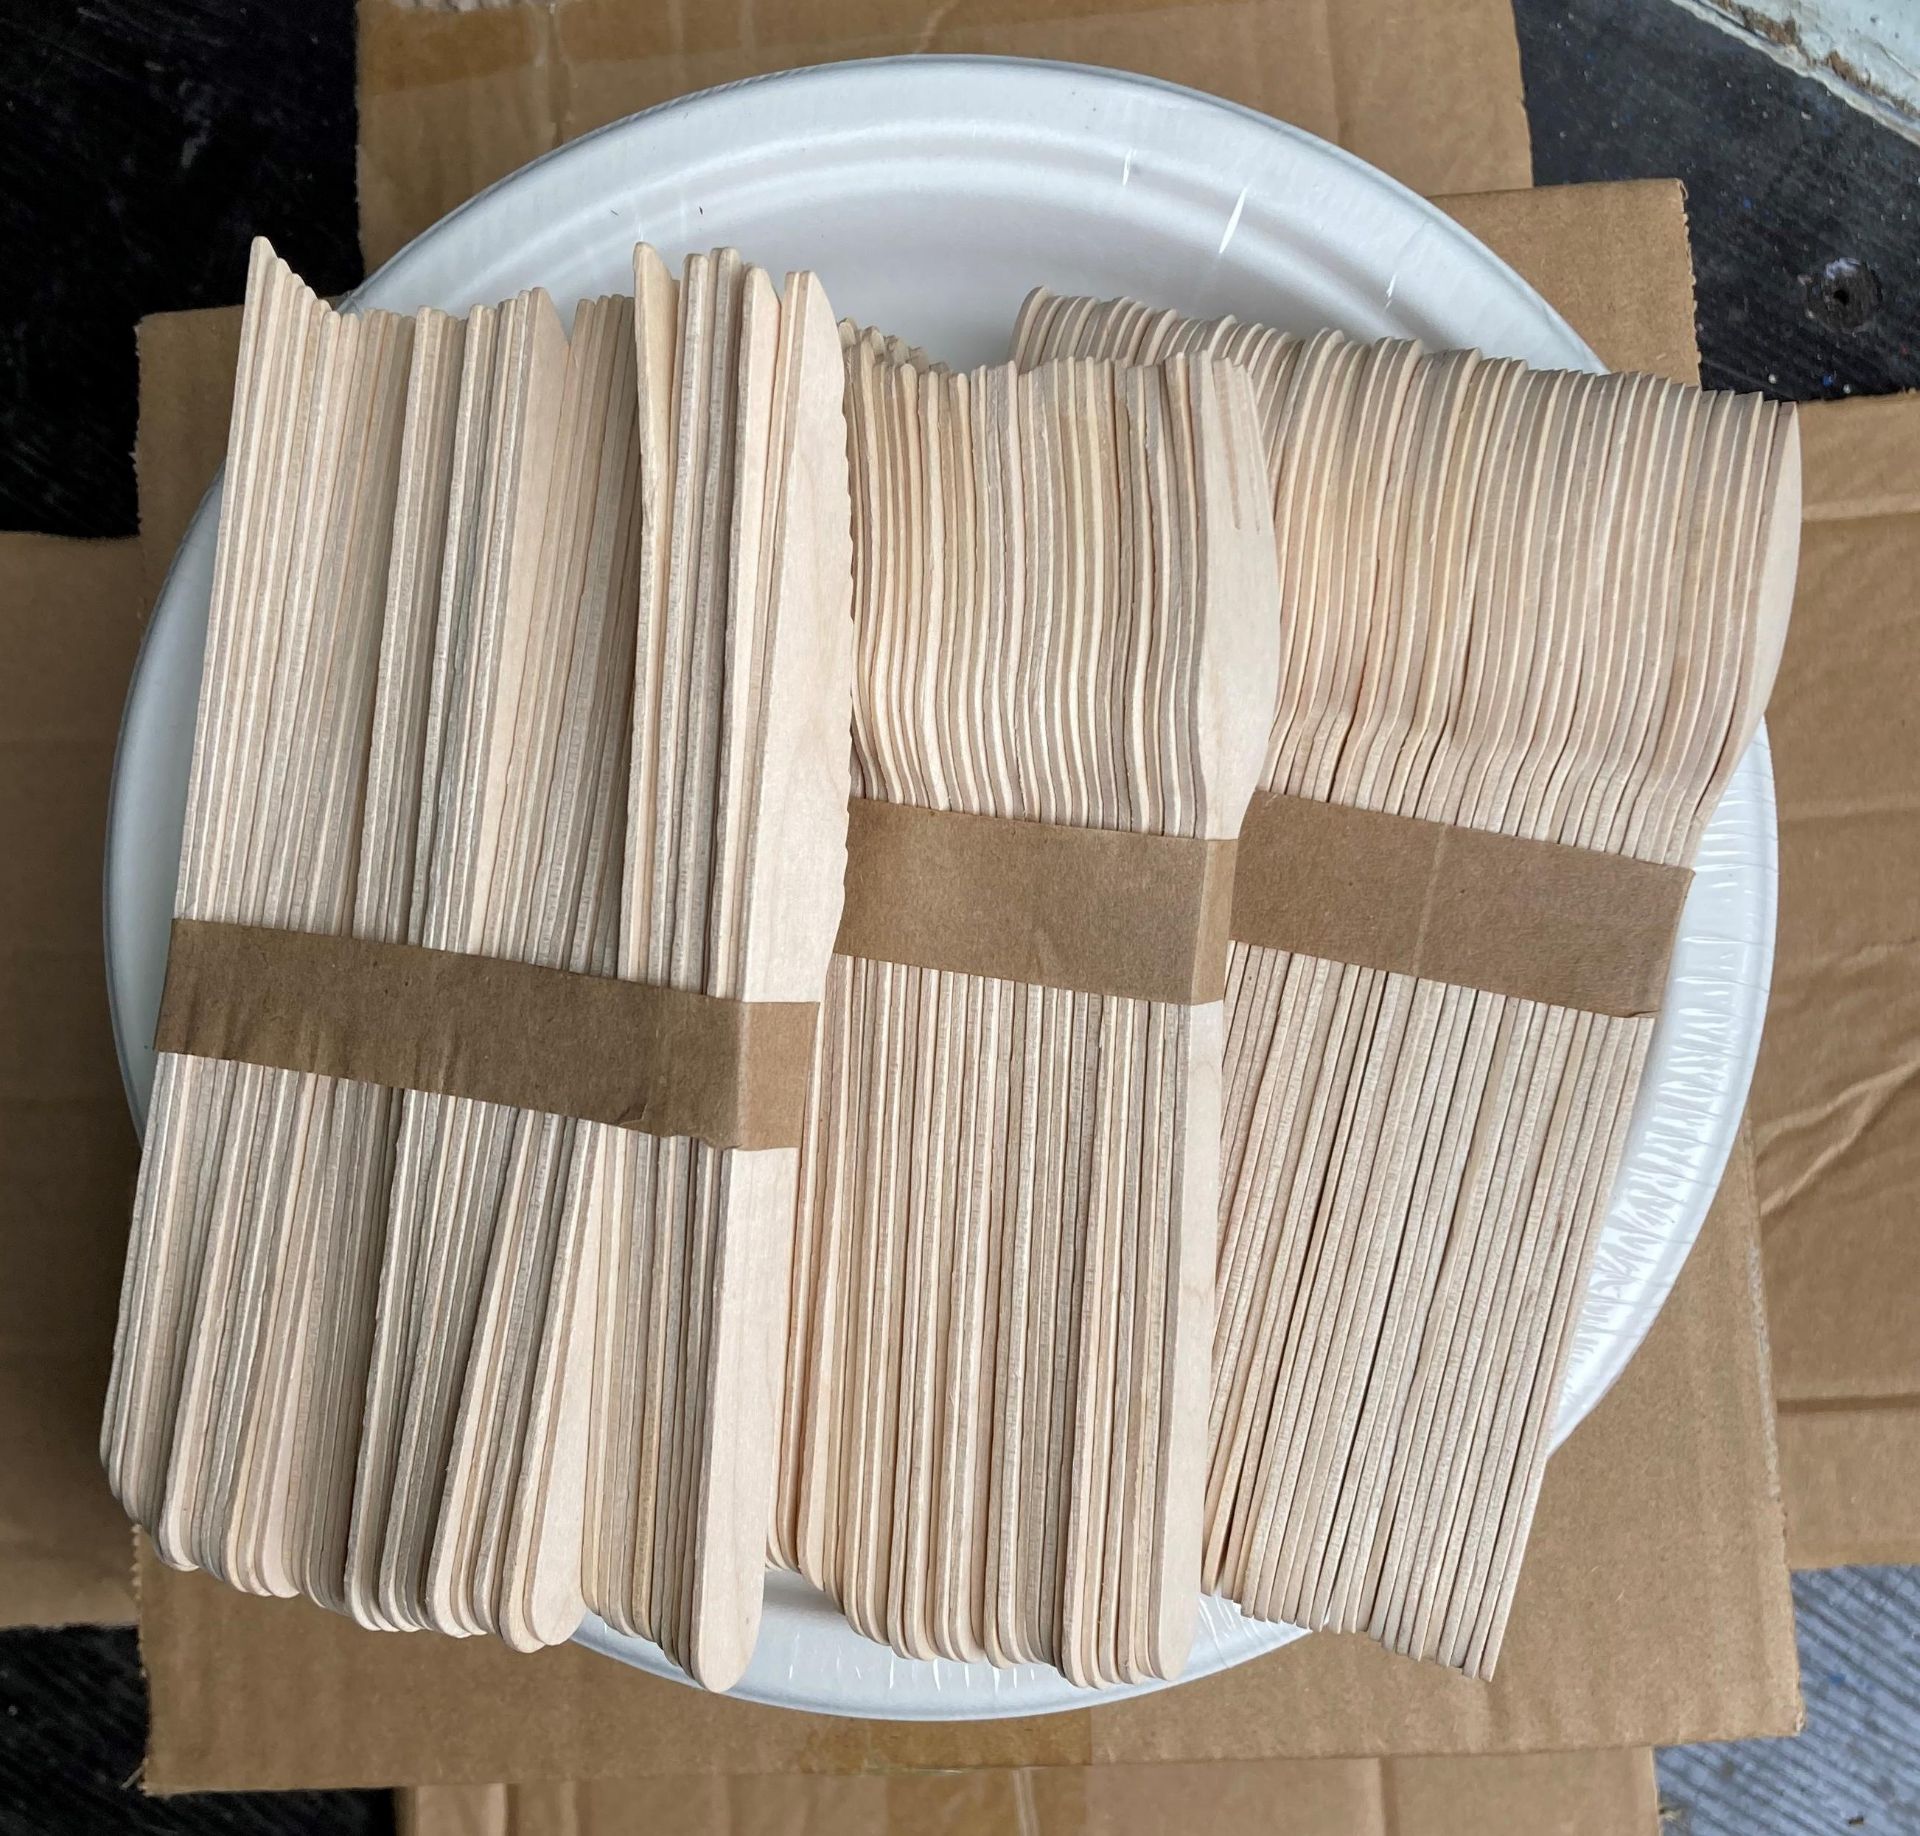 36 x packs and contents of approximately 60 x paper plates, sets of wooden knives, - Image 3 of 5